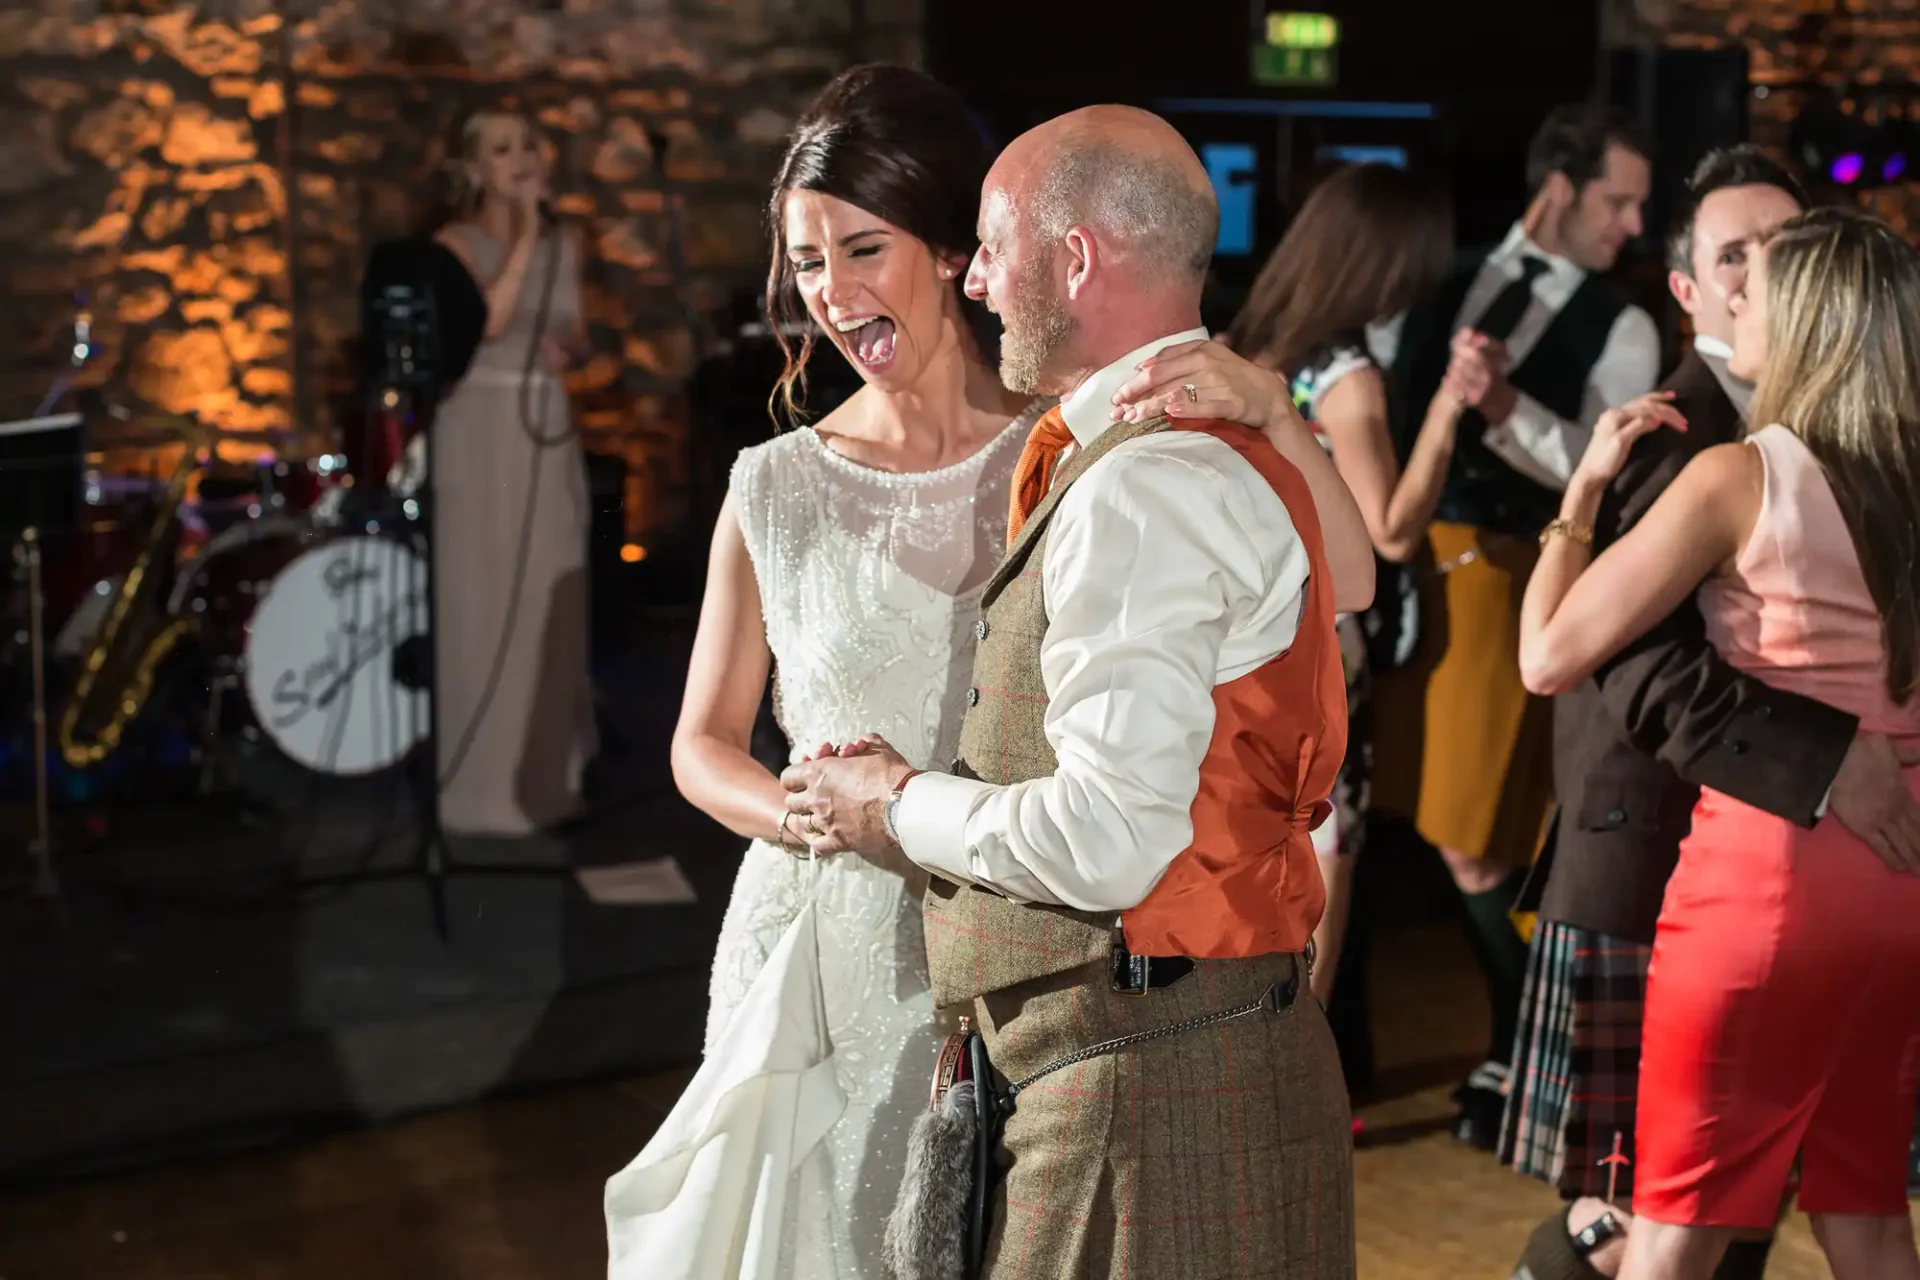 A bride and groom in wedding attire laugh together while dancing at a reception, with guests and a band in the background.